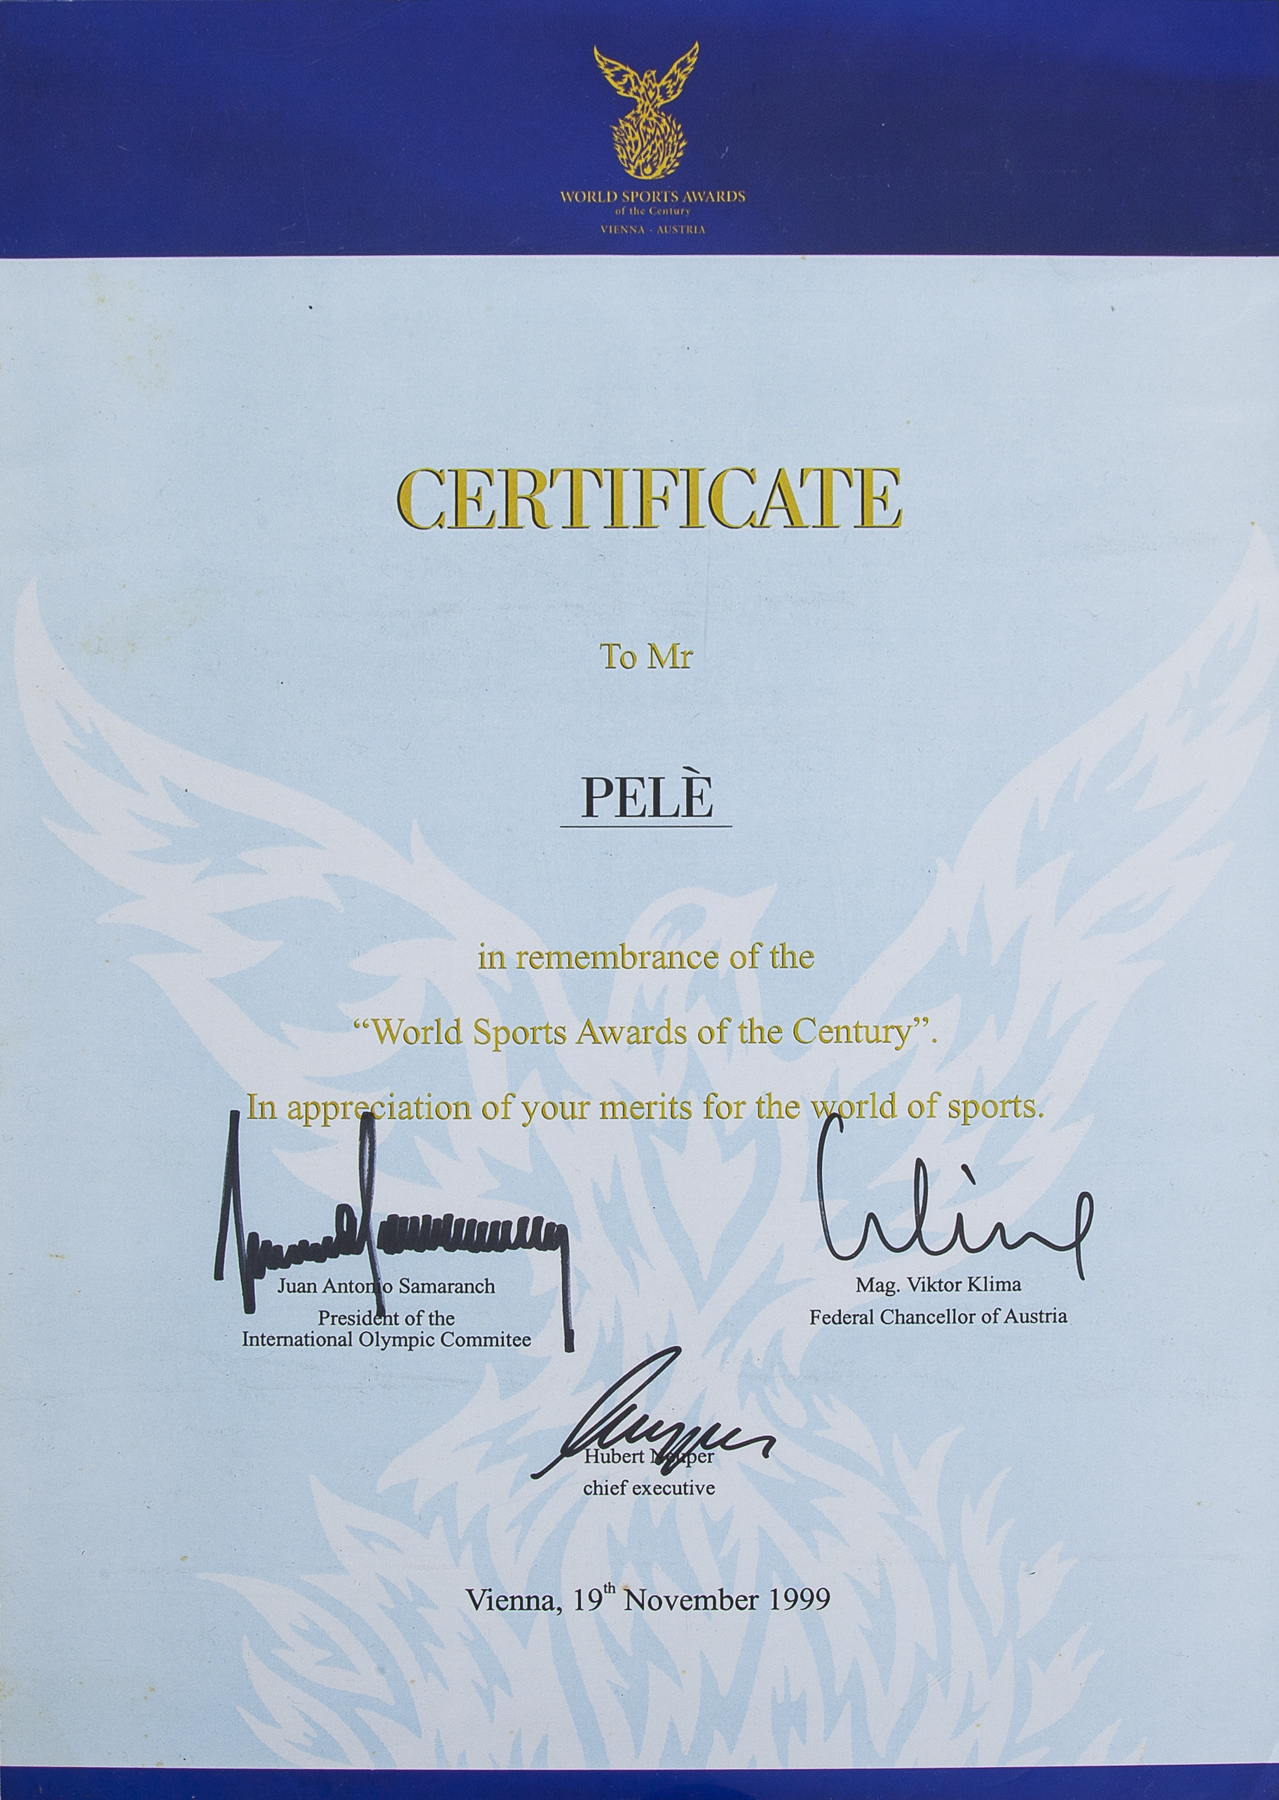 PELÉ WORLD SPORTS AWARDS OF THE CENTURY MEDAL AND CERTIFICATE - Image 3 of 3